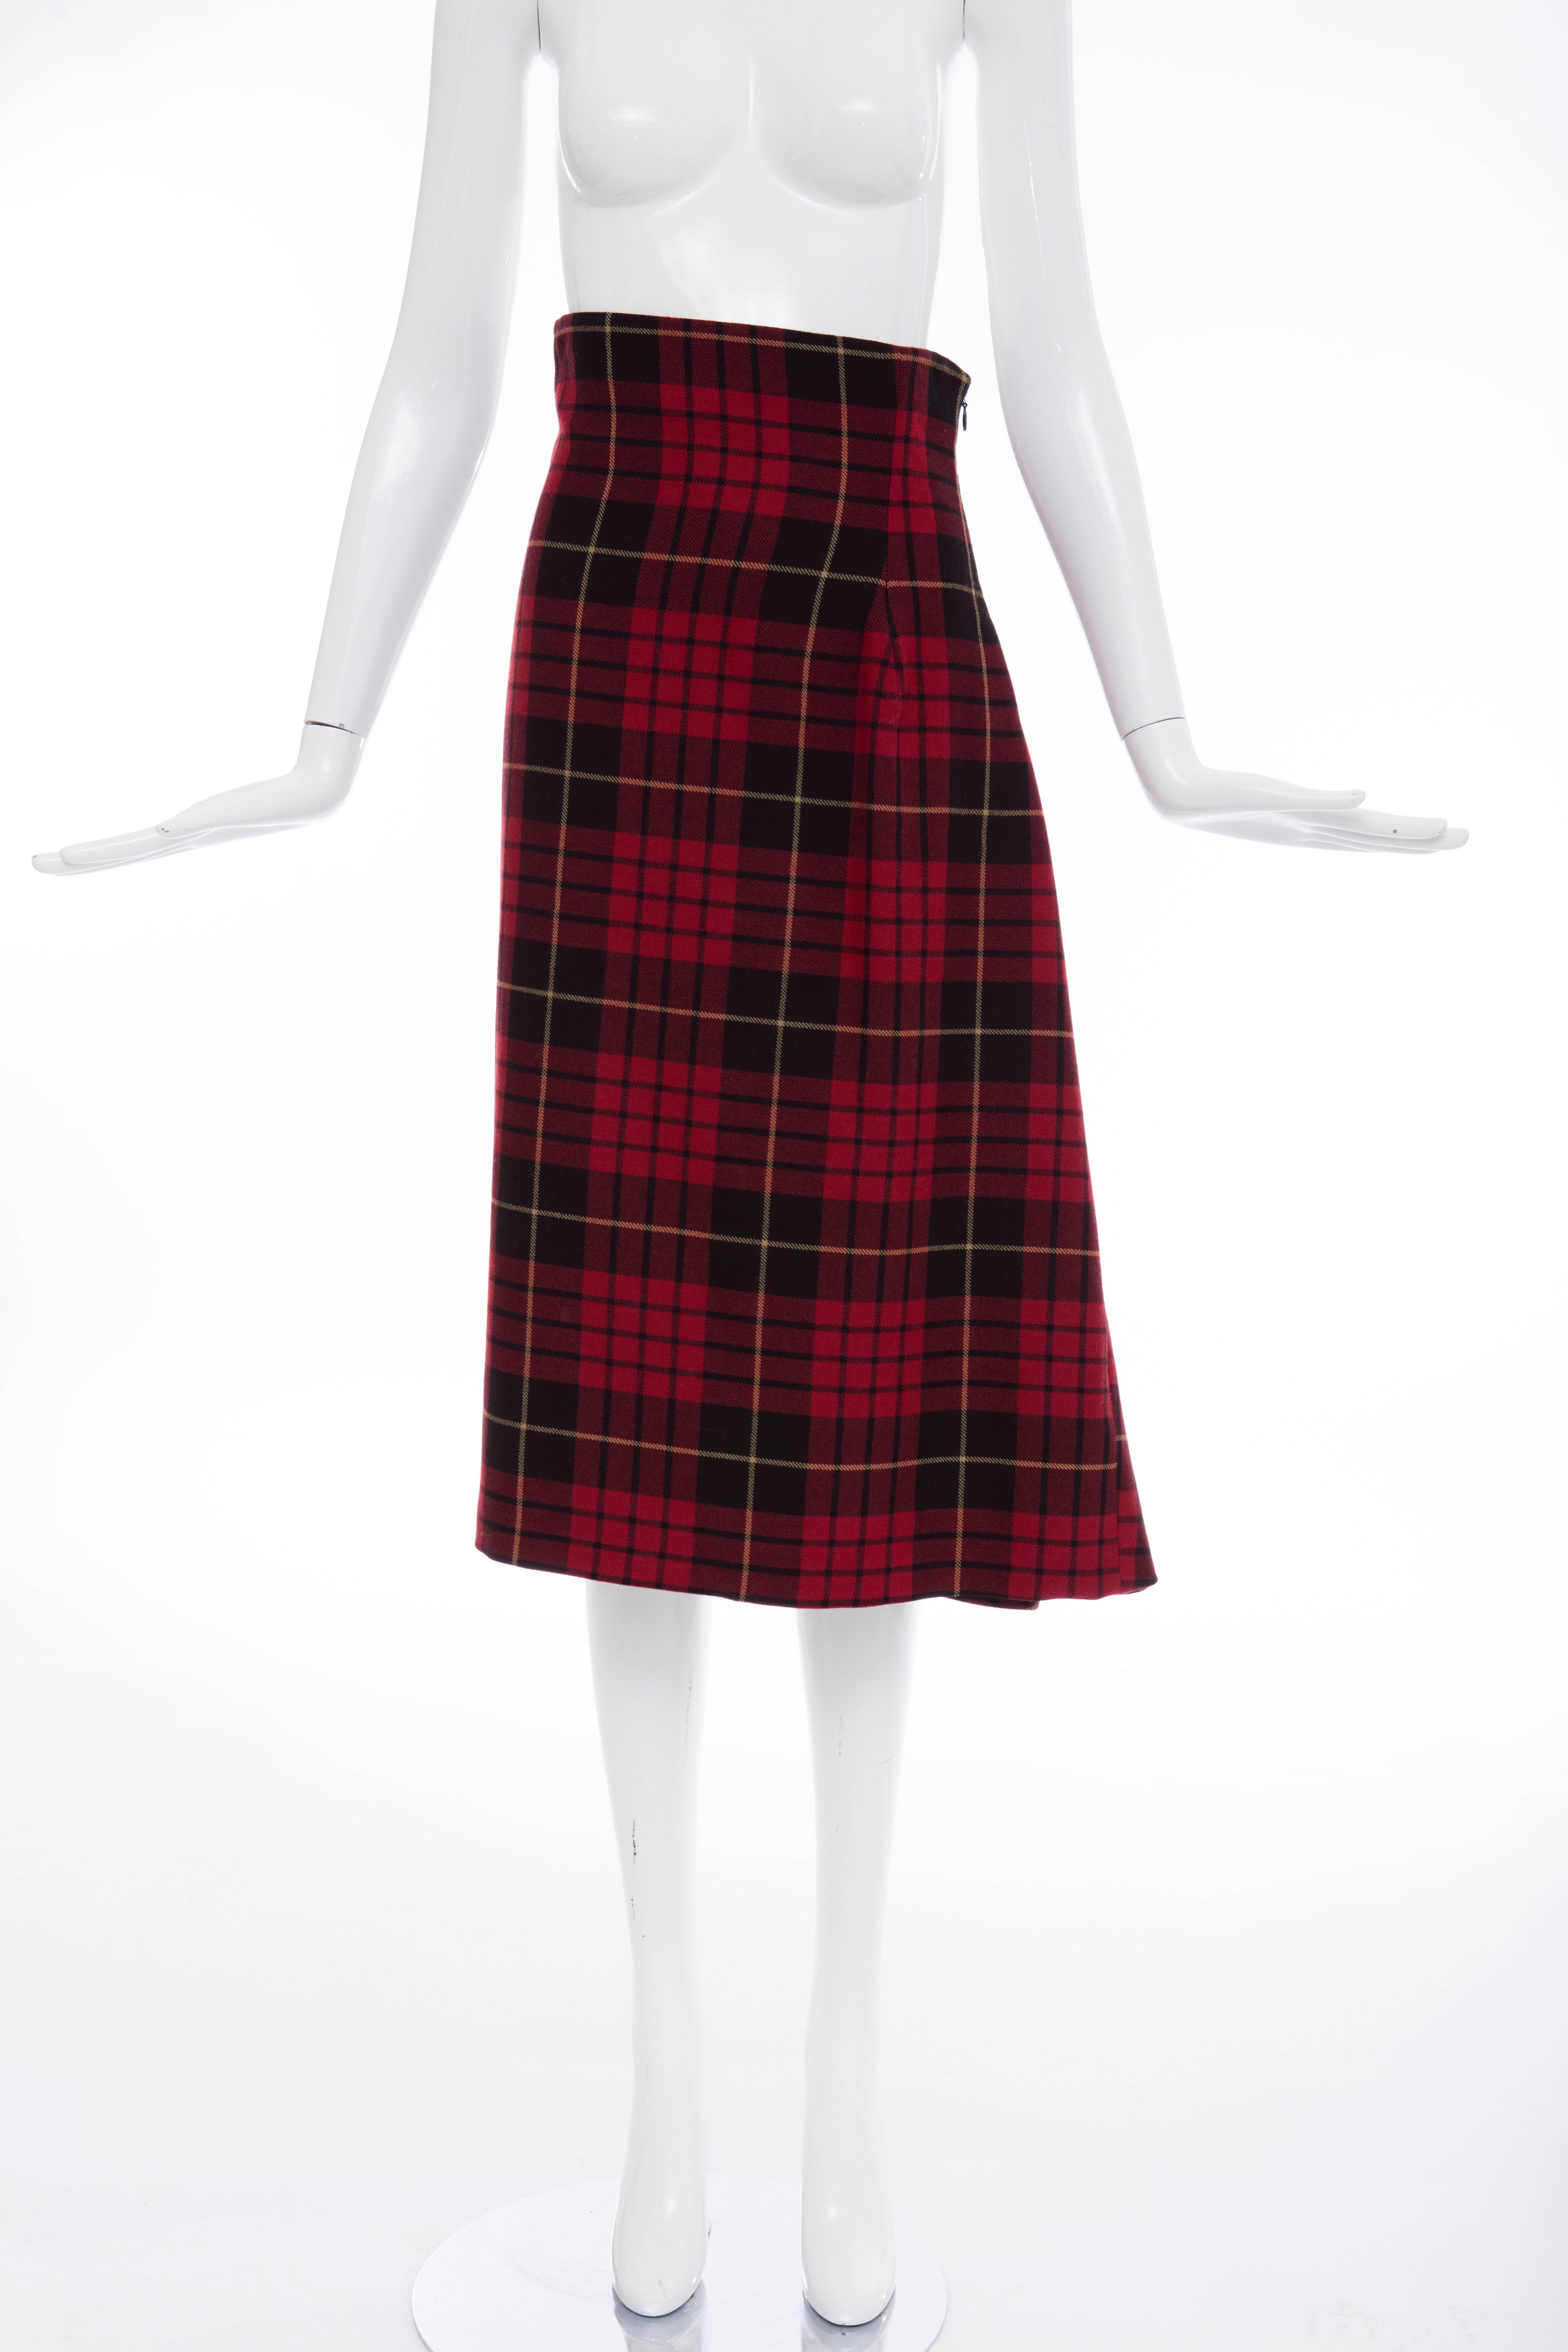 Alexander McQueen, Autumn-Winter 2006, wool red tartan plaid high-waisted skirt with asymmetric pleat, tonal stitching and concealed zip closure at back.

IT. 40
US. 4

Waist: 26, Hip: 38, Length: 32
